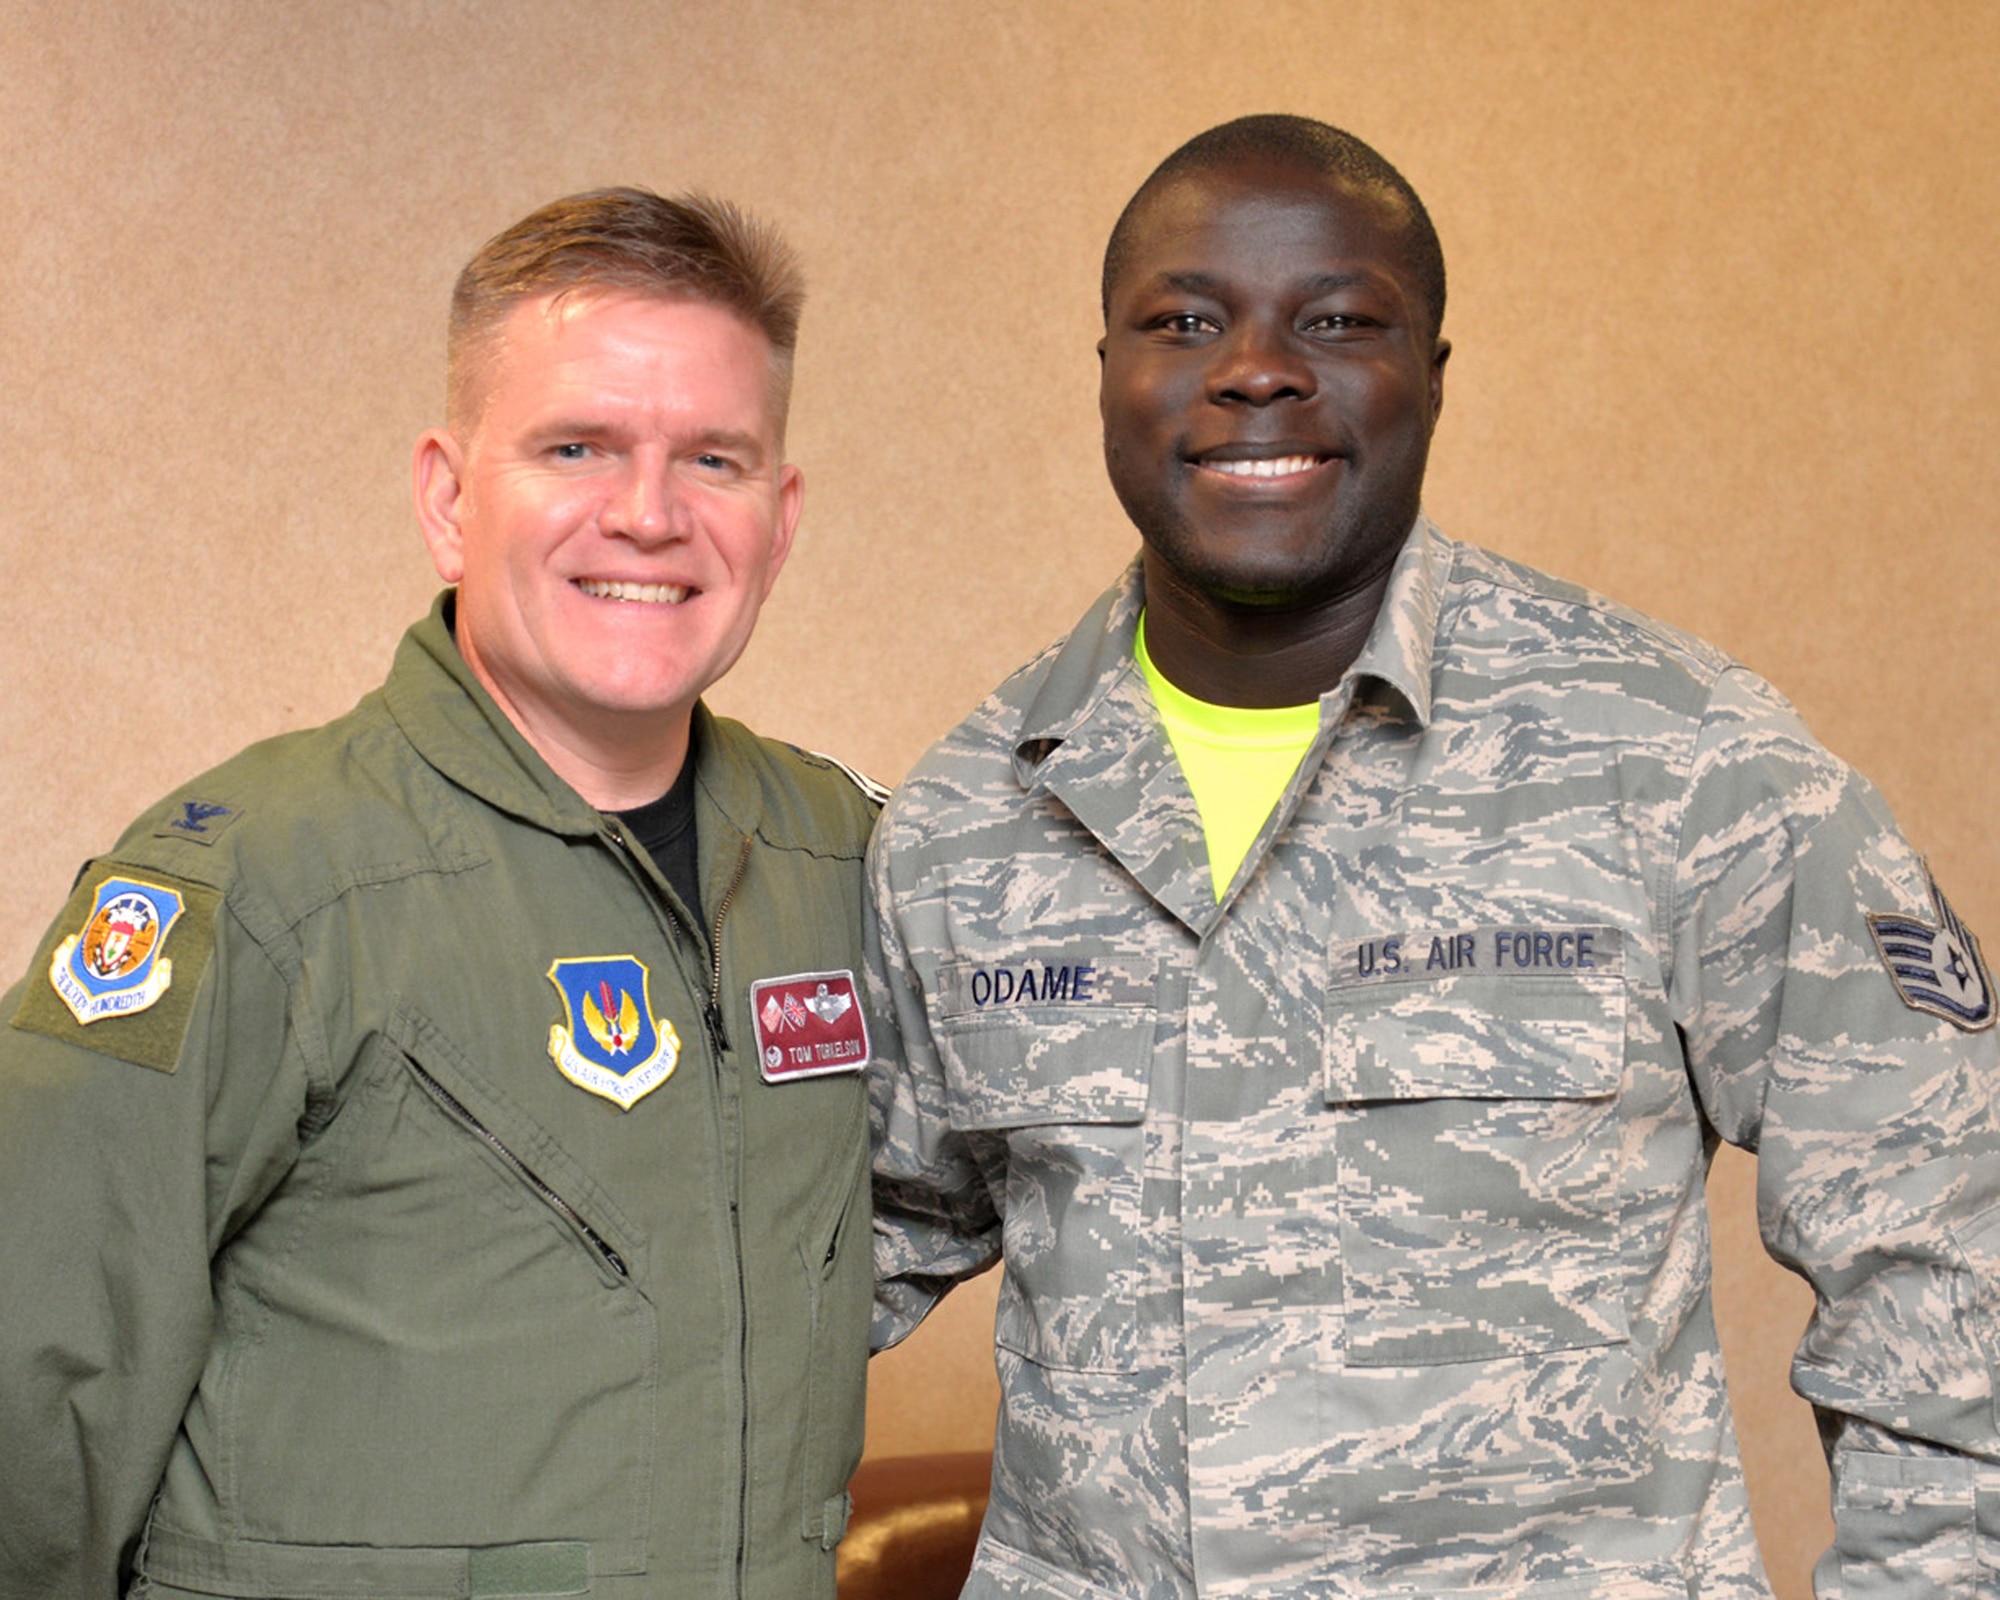 U.S. Air Force Staff Sgt. Richard Odame, right, 727th Air Mobility Squadron air freight supervisor, stands with U.S. Air Force Col. Thomas D. Torkleson, 100th Air Refueling Wing commander, after being presented a Commander’s Coin, Nov. 13, 2015, on RAF Mildenhall. Odame helped a cyclist who had been hit by a motorist, Nov. 2, 2015, along the A1101 near Mildenhall, England. Odame ensured the cyclist was kept conscious and warm while directing traffic until the local emergency services arrived. (U.S. Air Force photo by Karen Abeyasekere/Released)